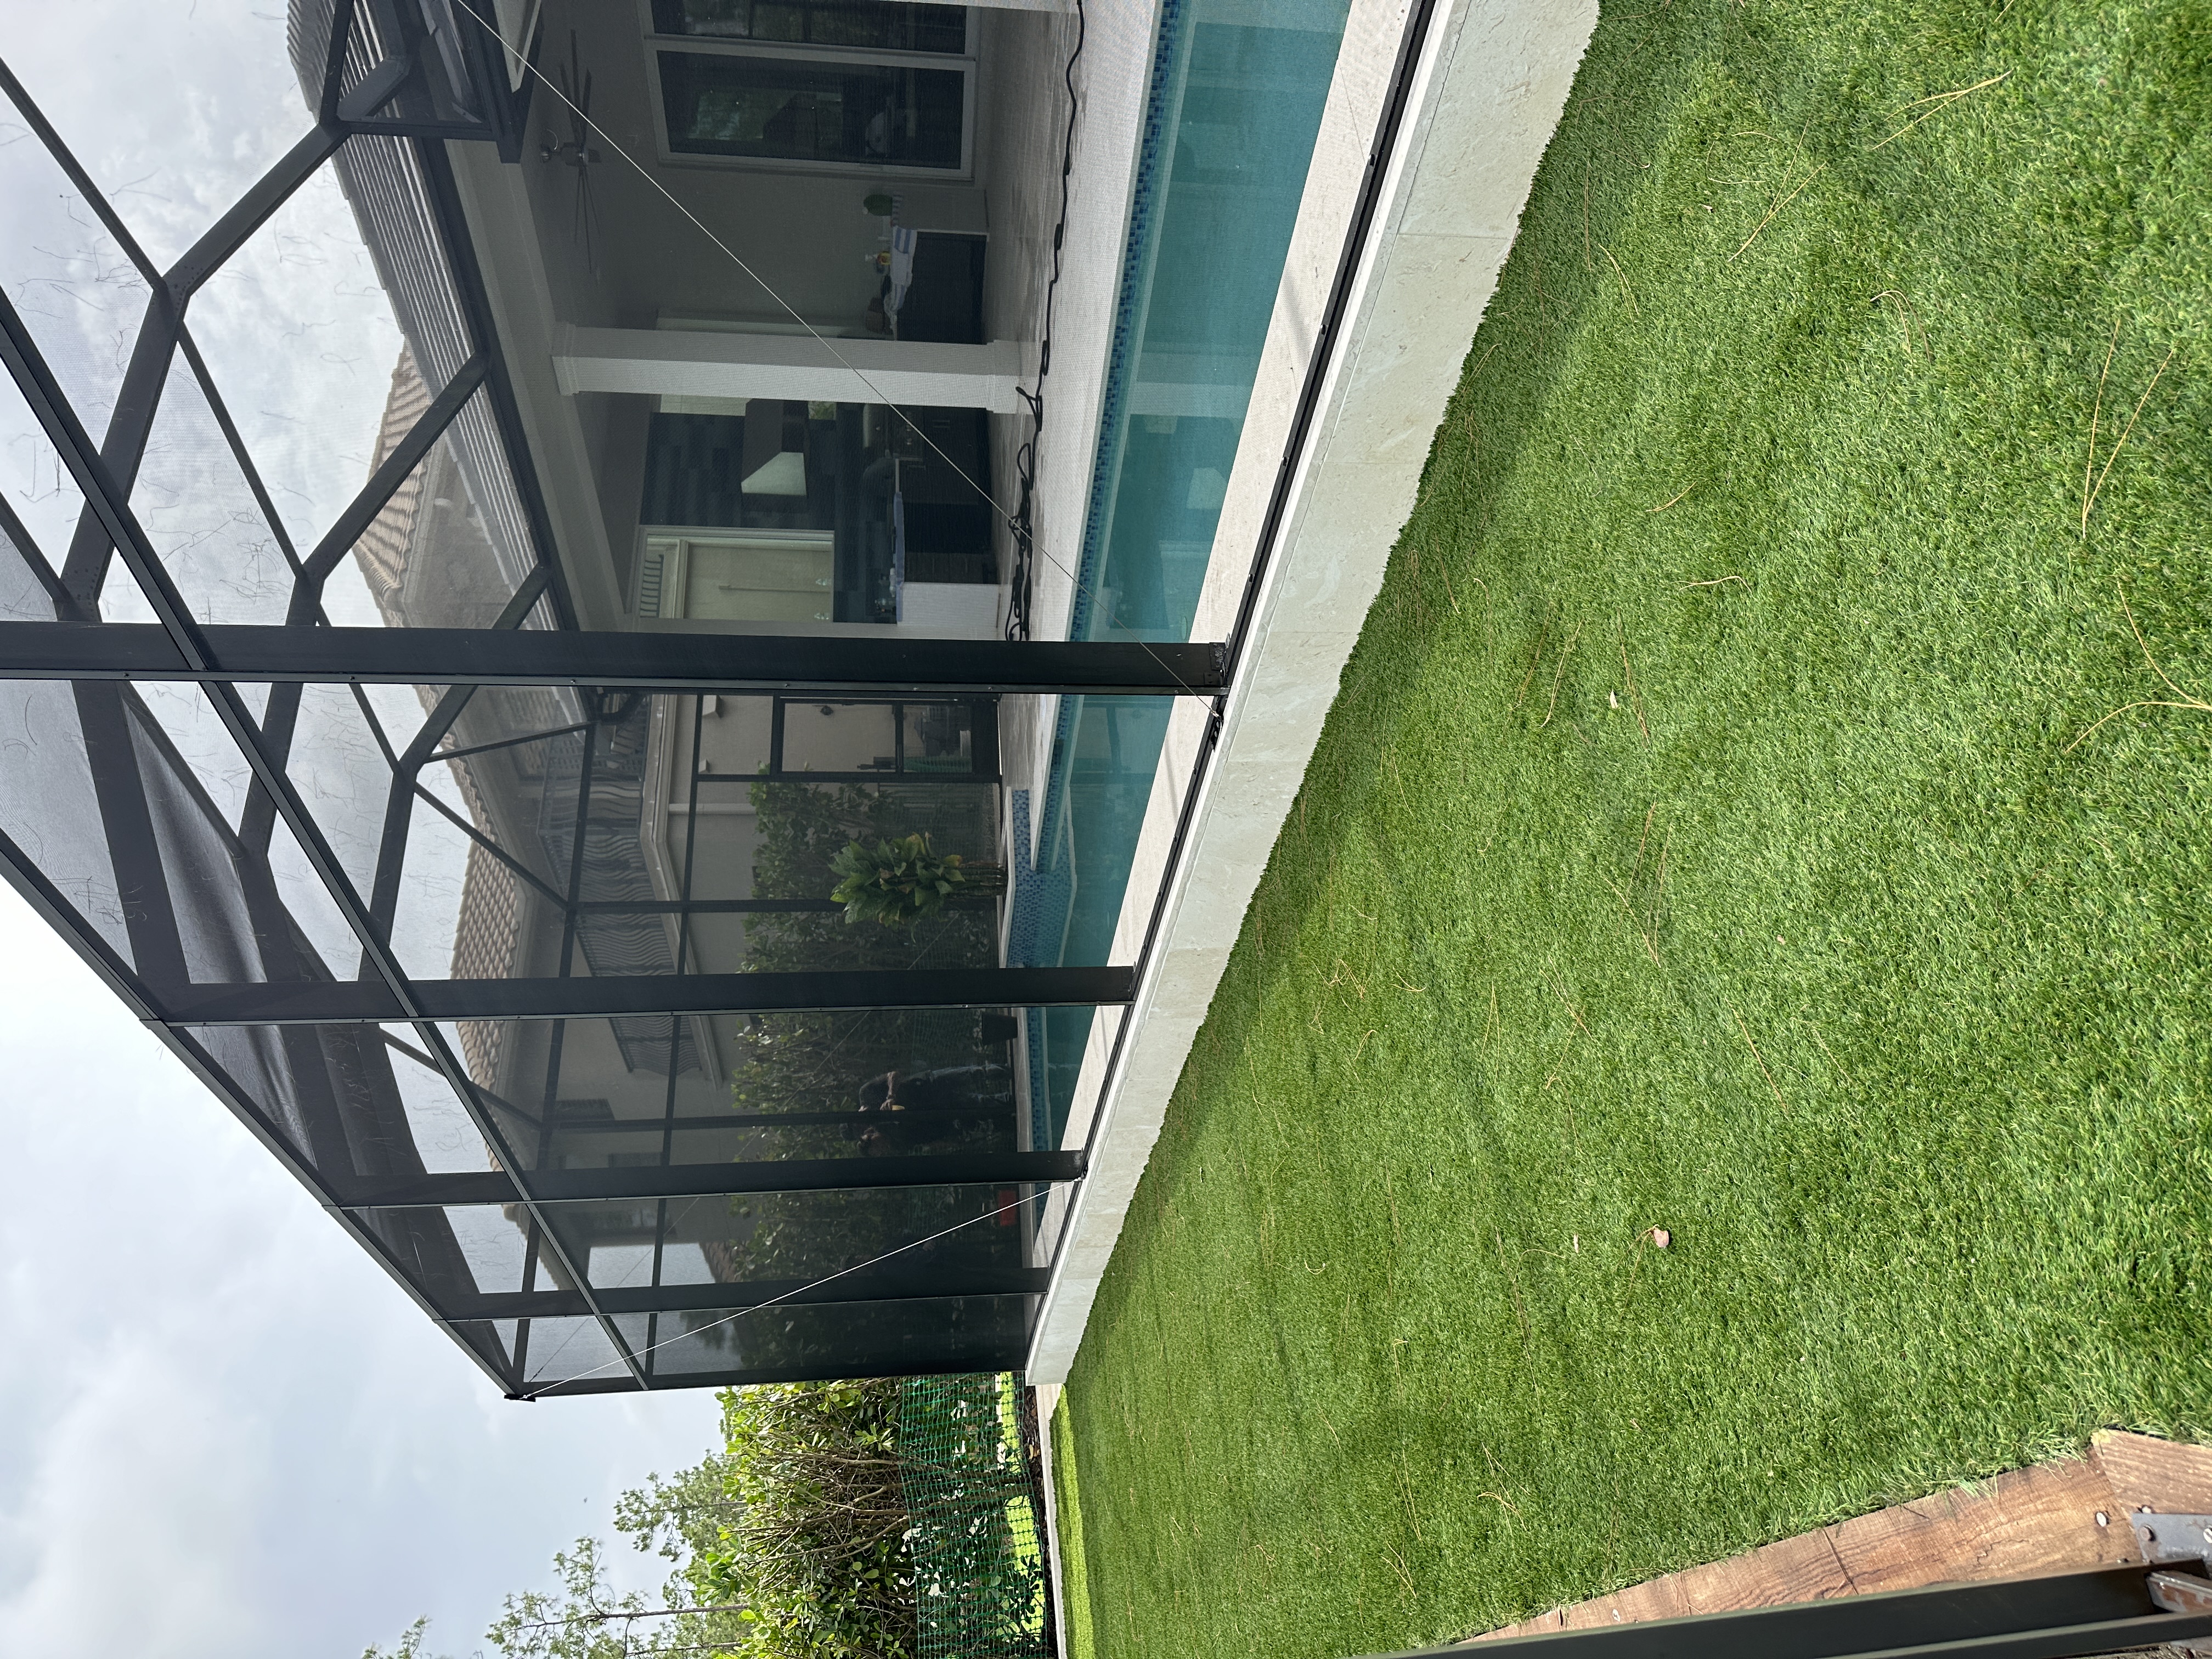 How much does Artificial Turf Cost in SW Florida?